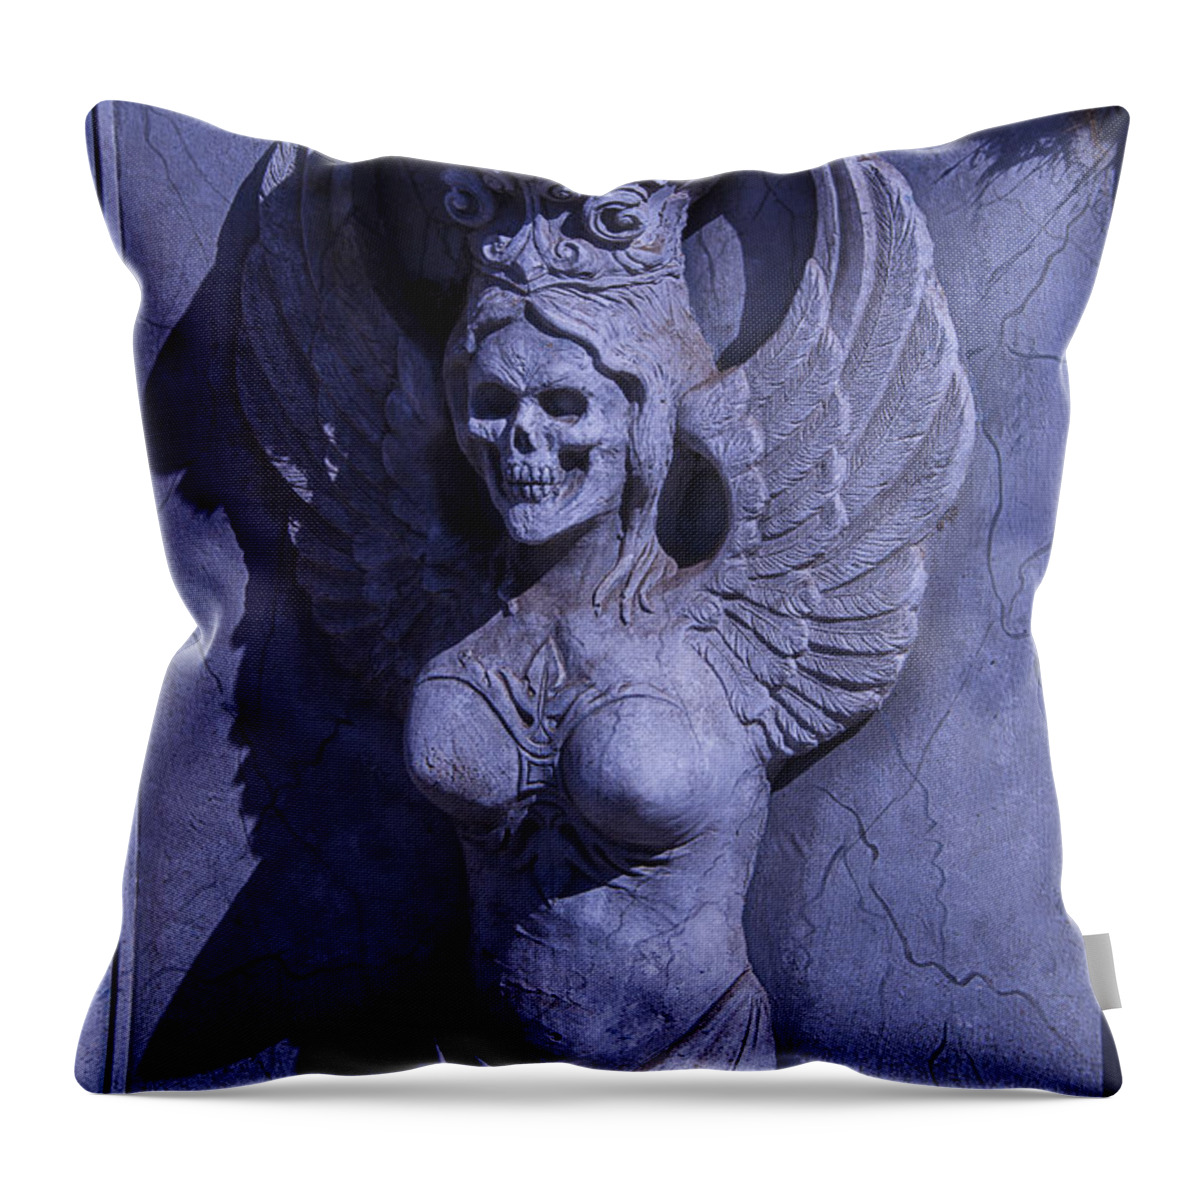 Winged Death Statue Throw Pillow featuring the photograph Winged Death Statue by Garry Gay